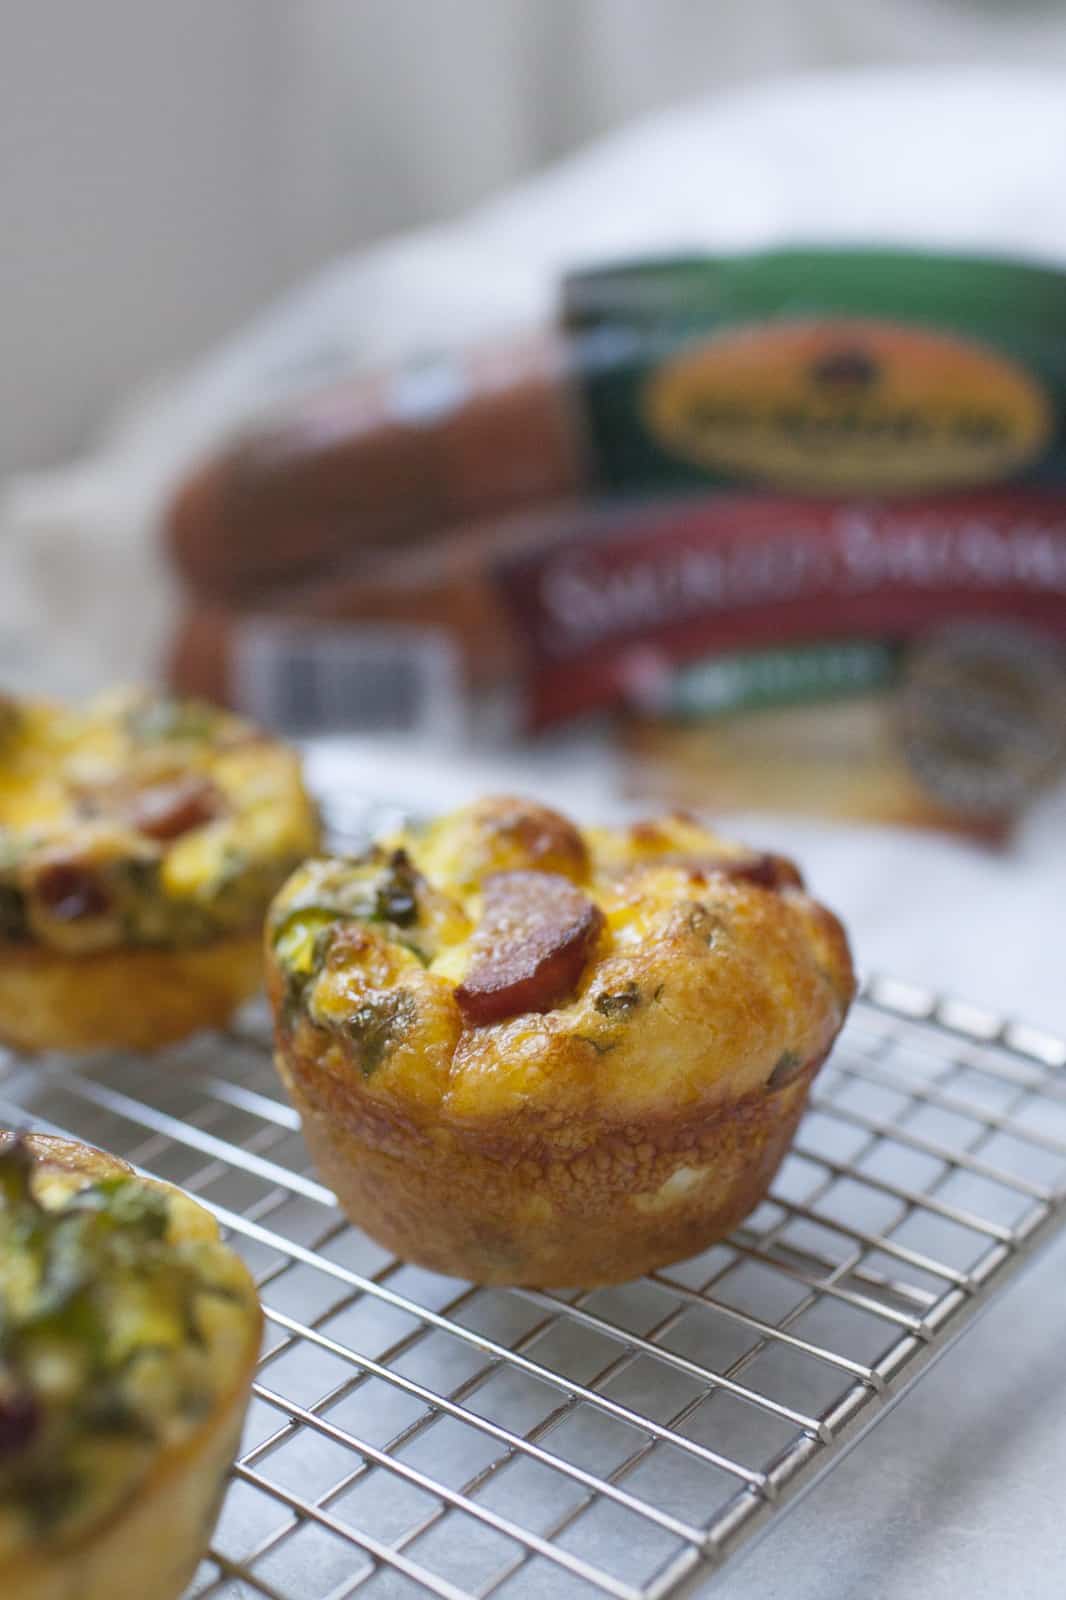 Make Ahead Egg Muffins are a perfect solution for making breakfast ahead of time for the week, to take to work or for brunch! Made with smoked sausage, kale, sundried tomatoes and feta, these egg muffins are small but packed with flavor.?